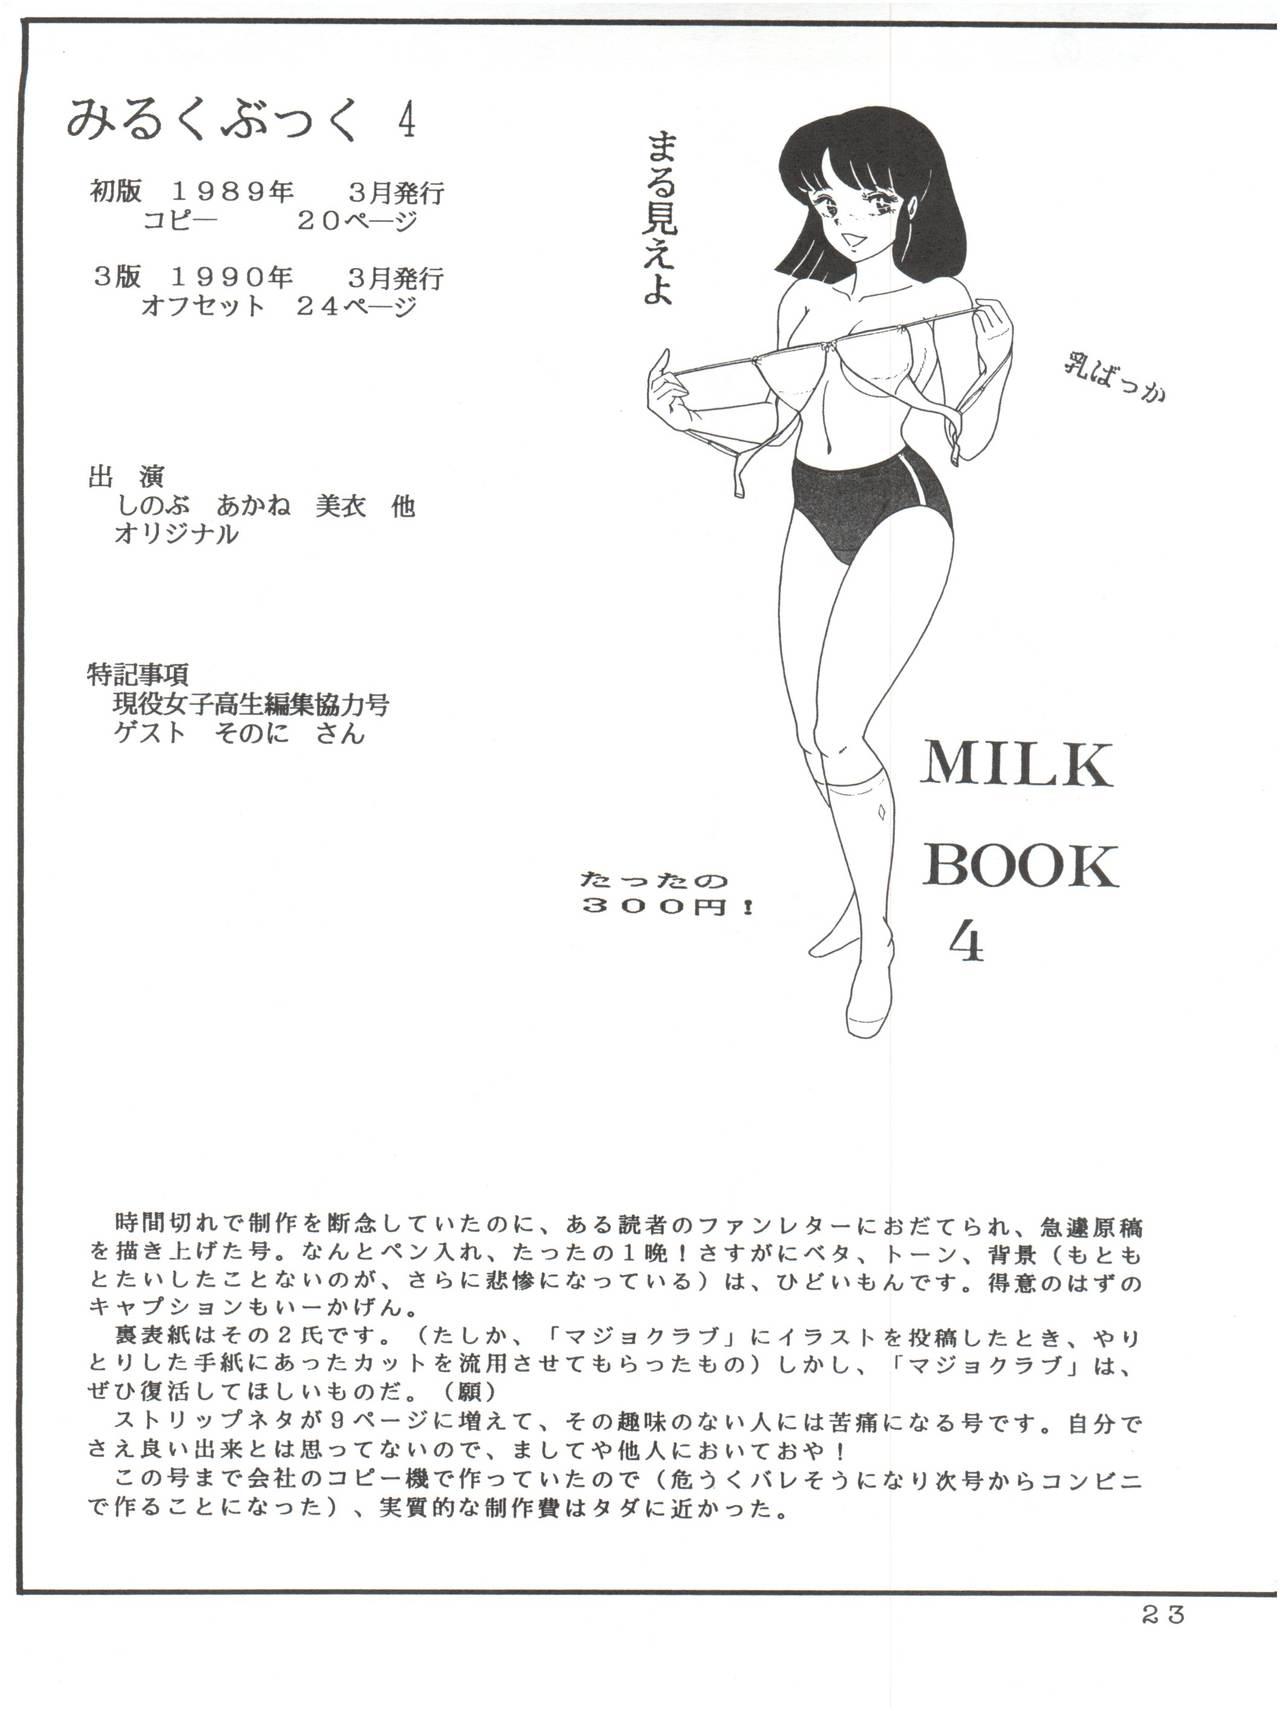 Milk Book Collections 1986-1990 22